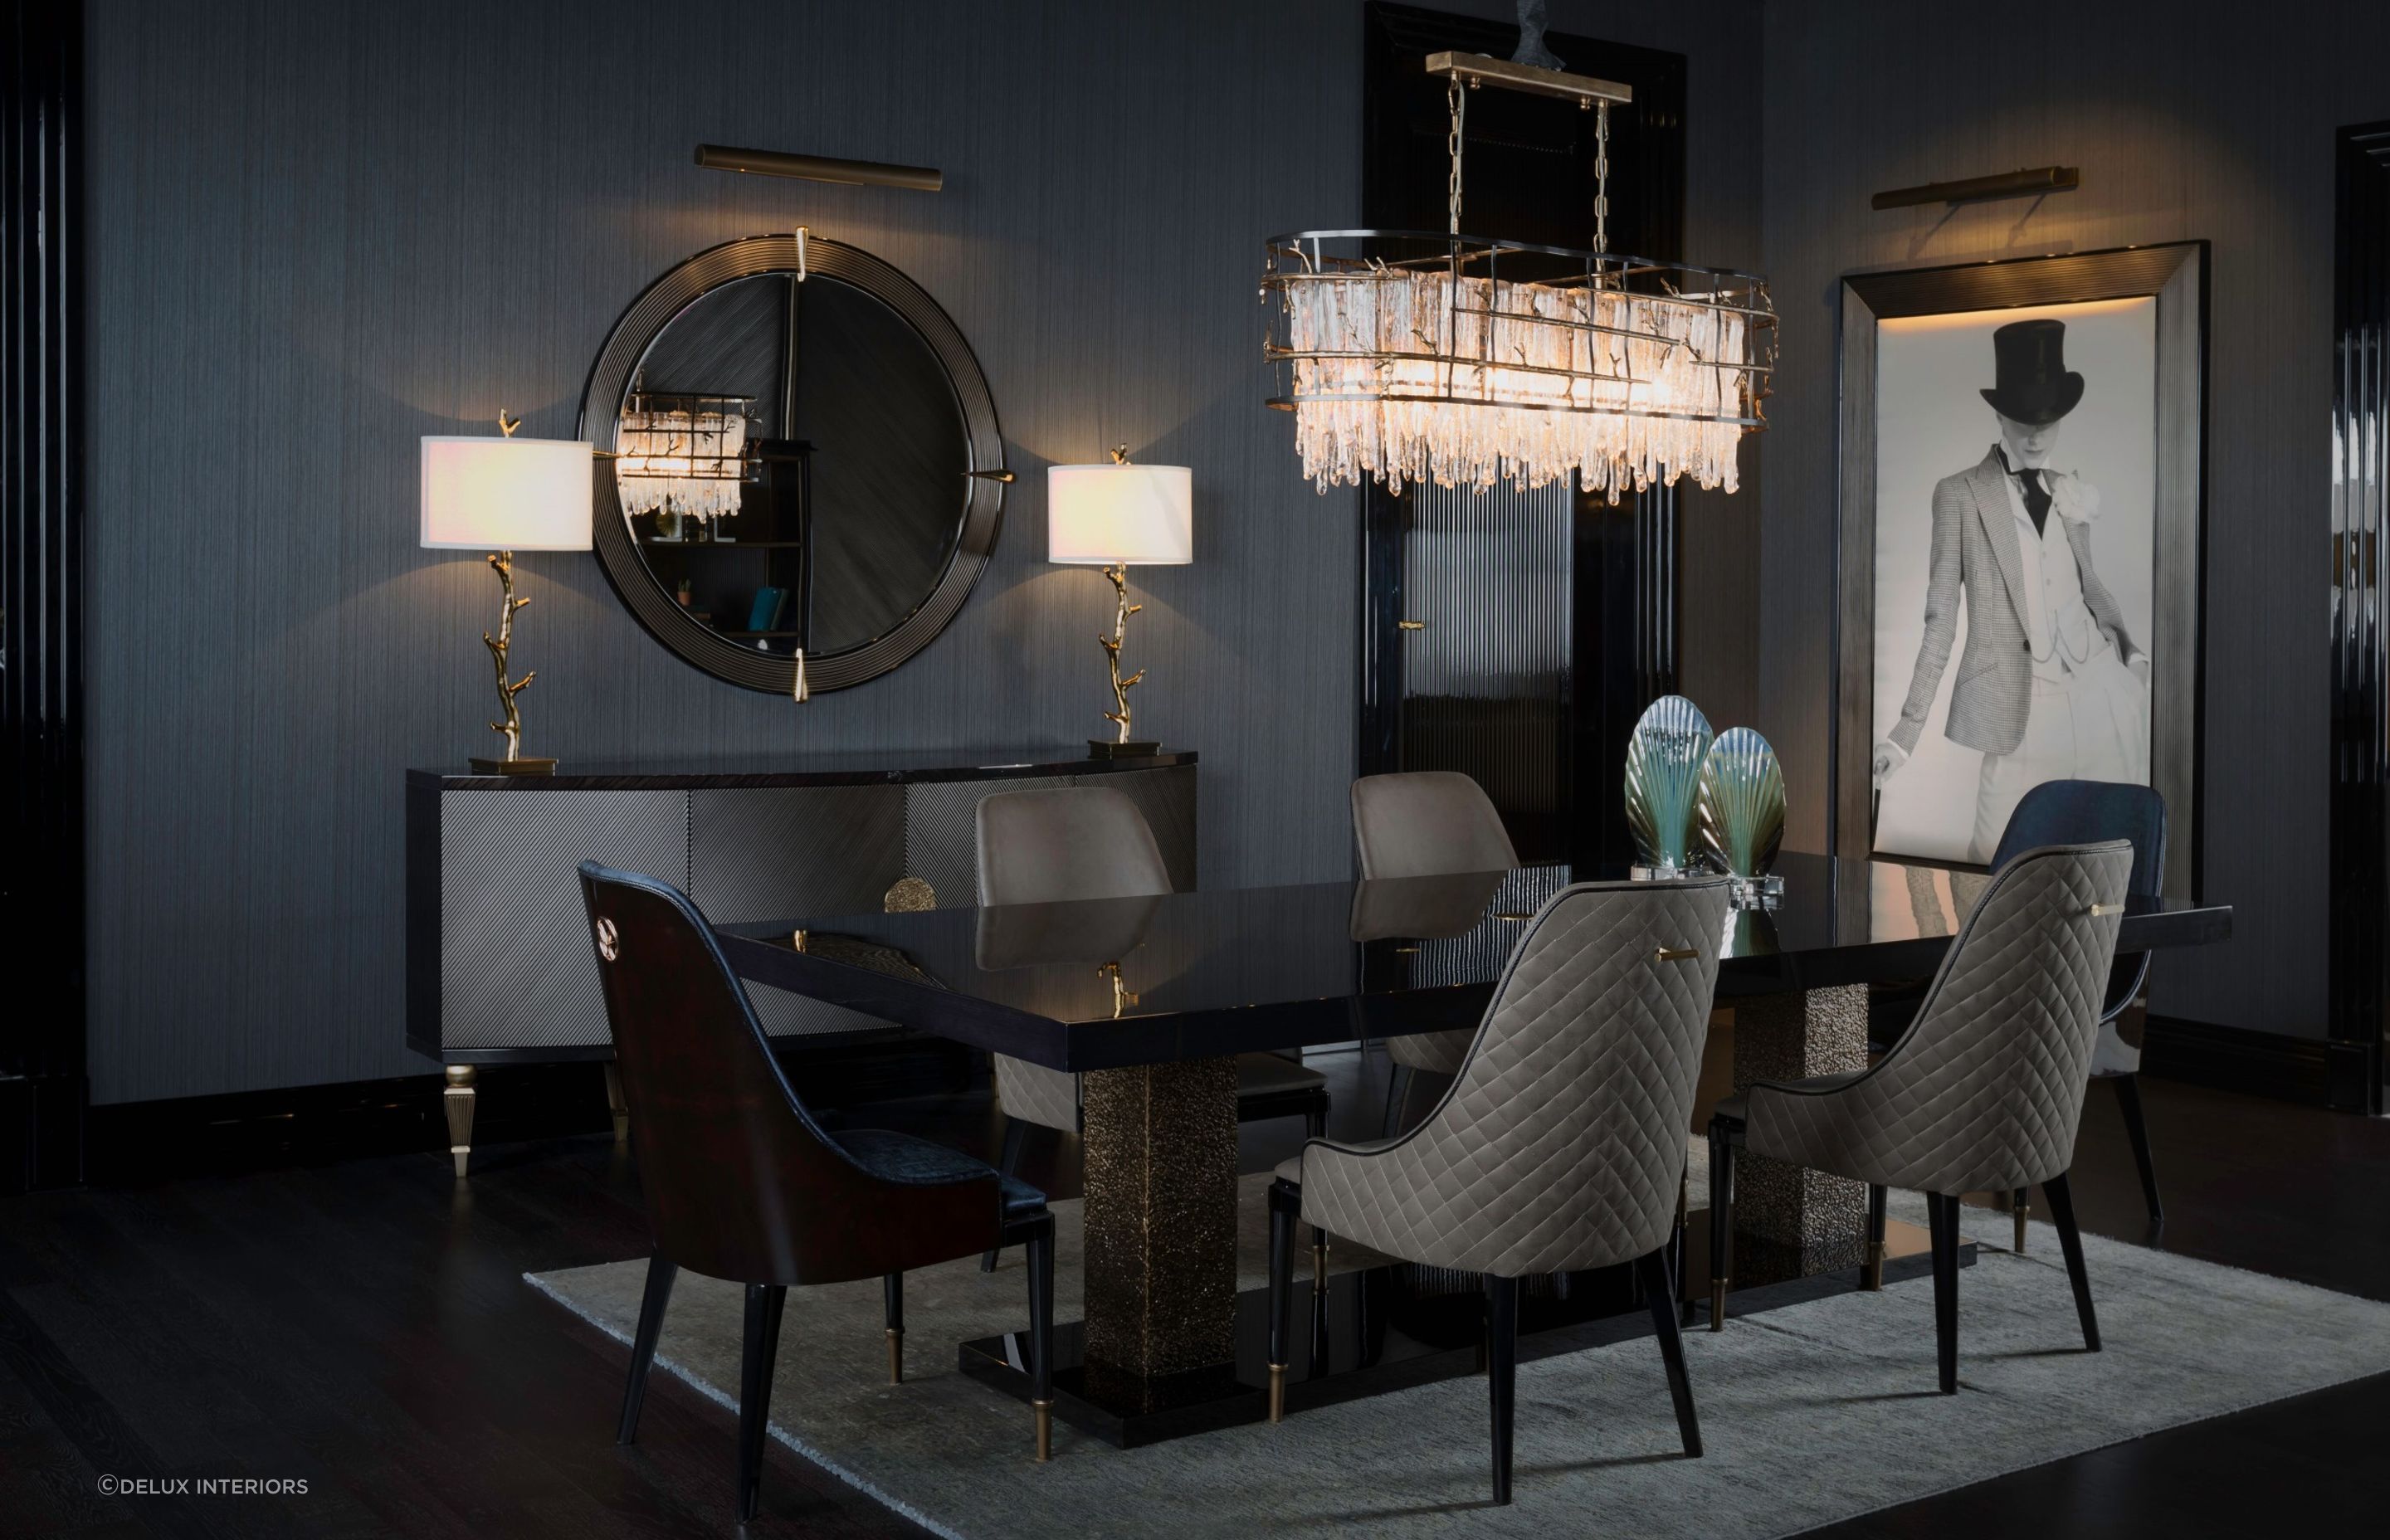 An opulent chandelier adds natural grace and elegance, seen here with the equally luxurious Stone Dining Table.